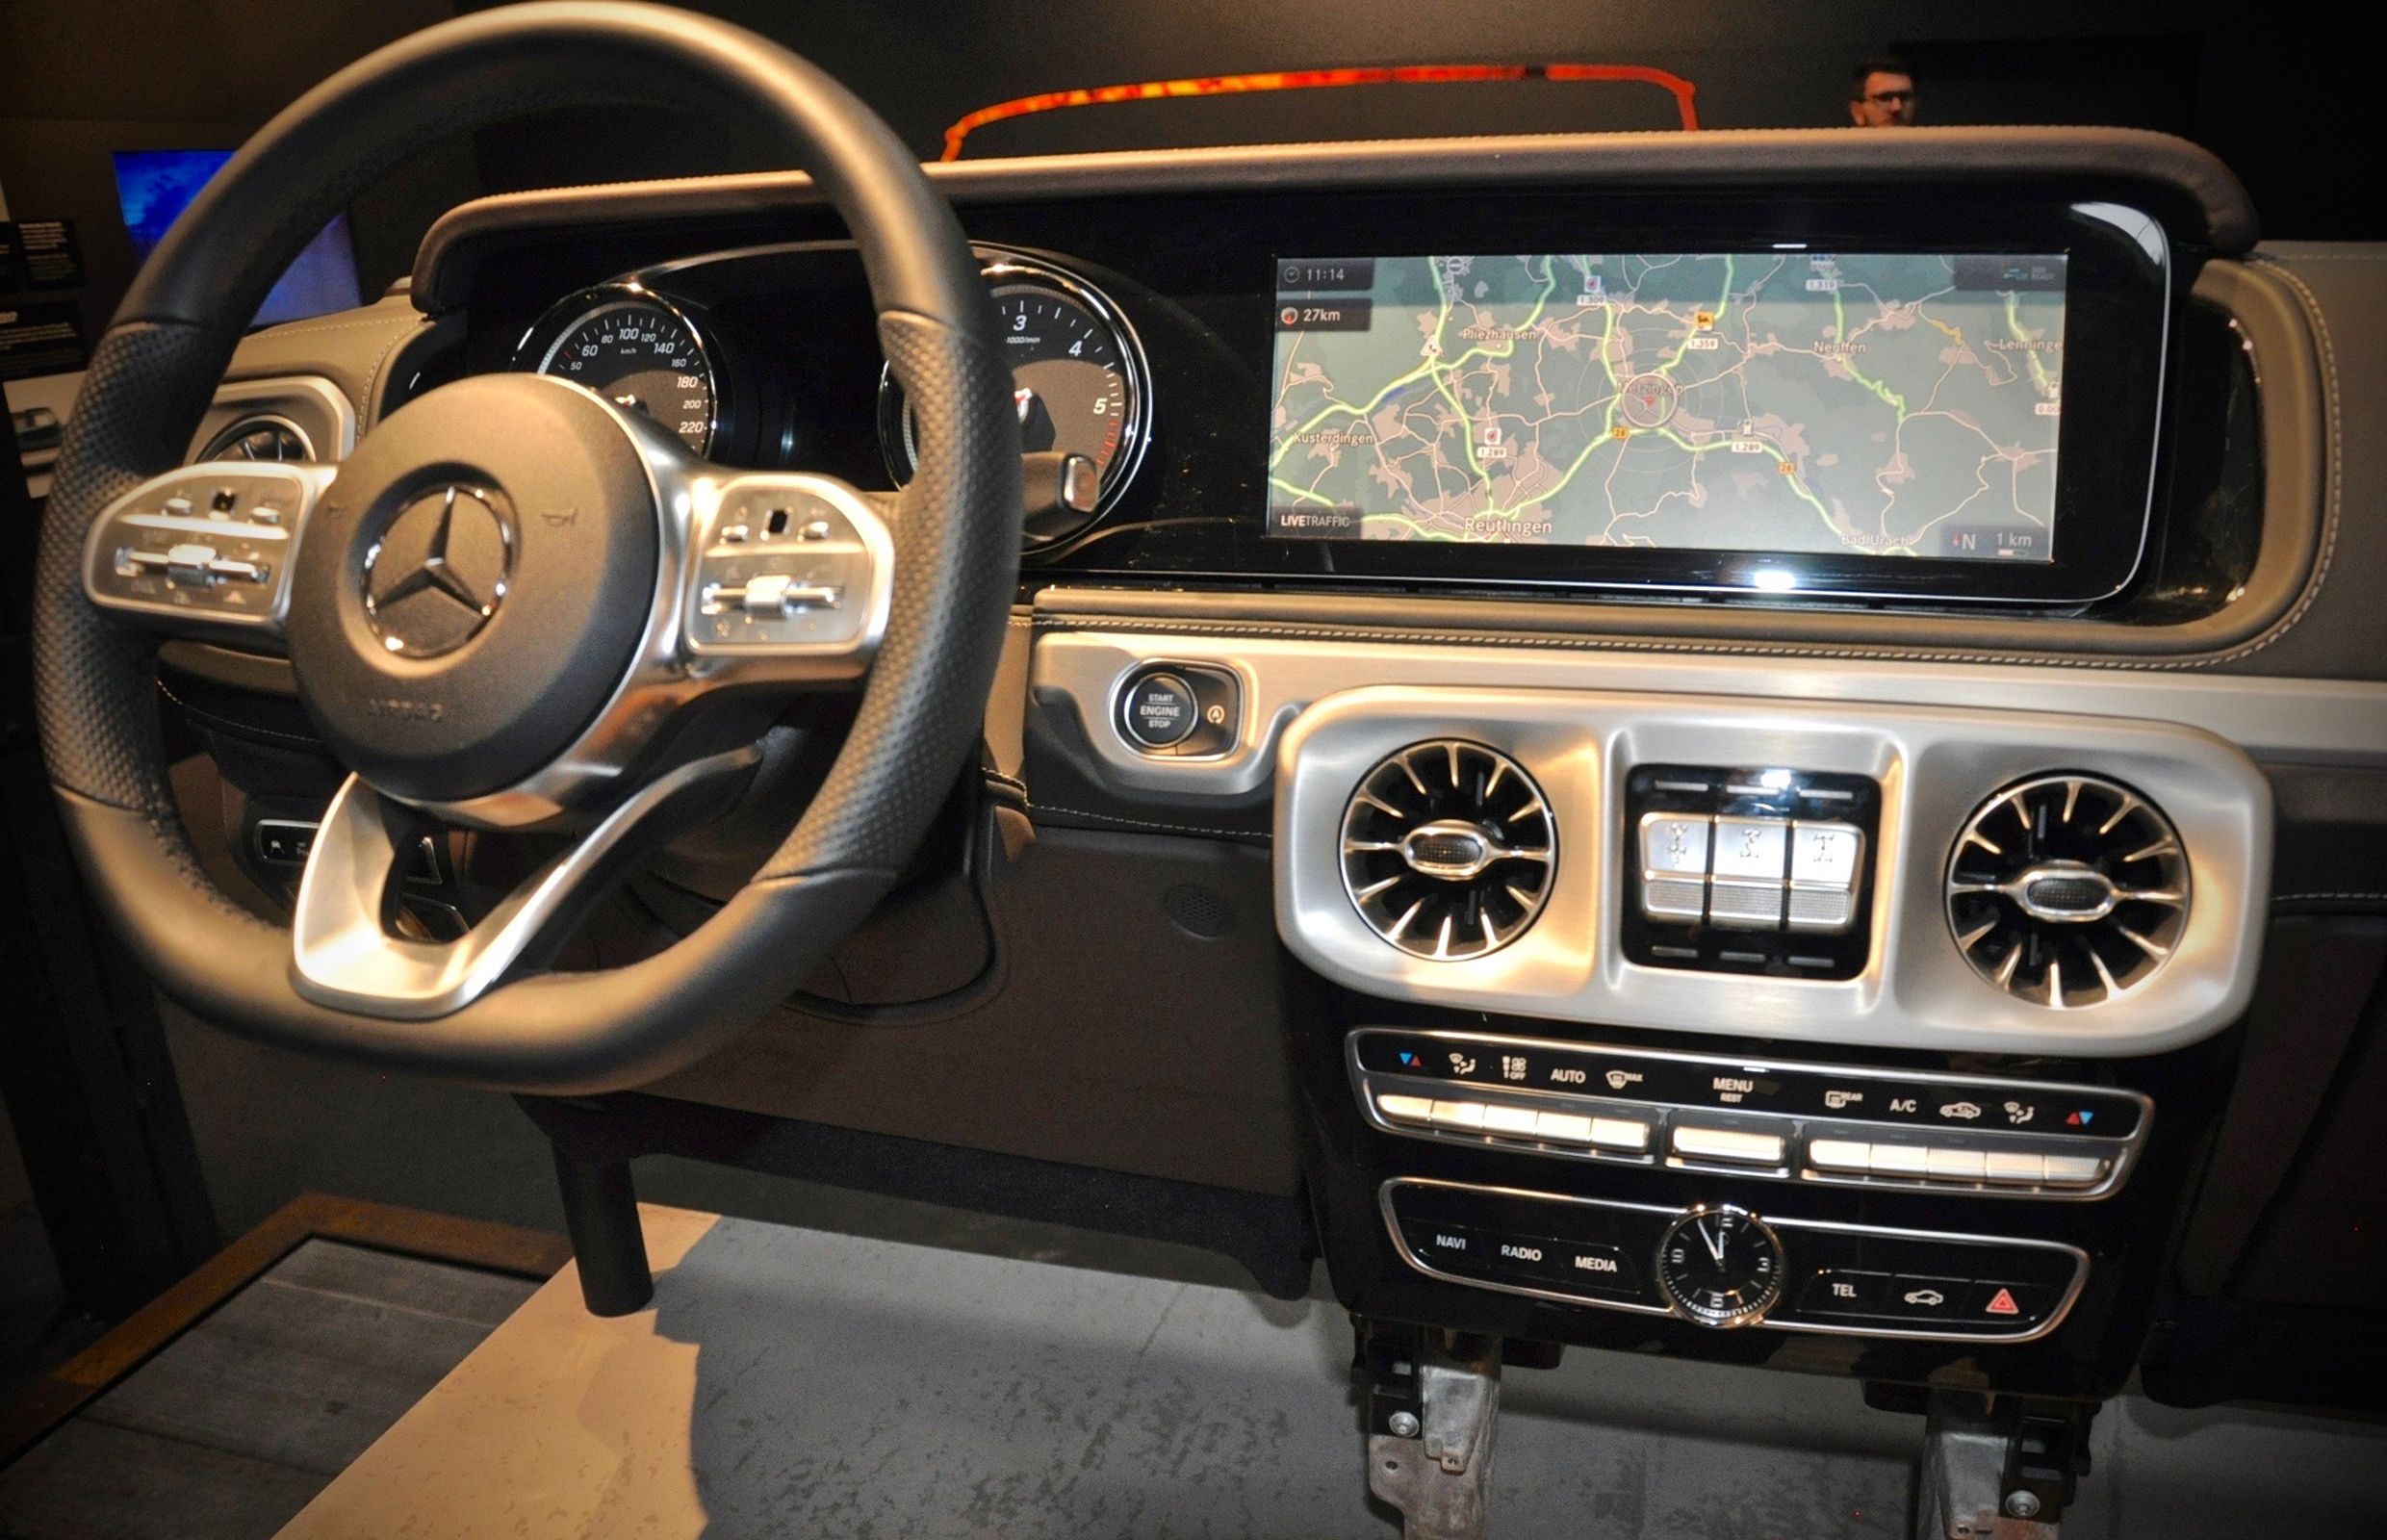 New Mercedes-Benz G63 AMG launched at Rs 2.19 crore - Times of India